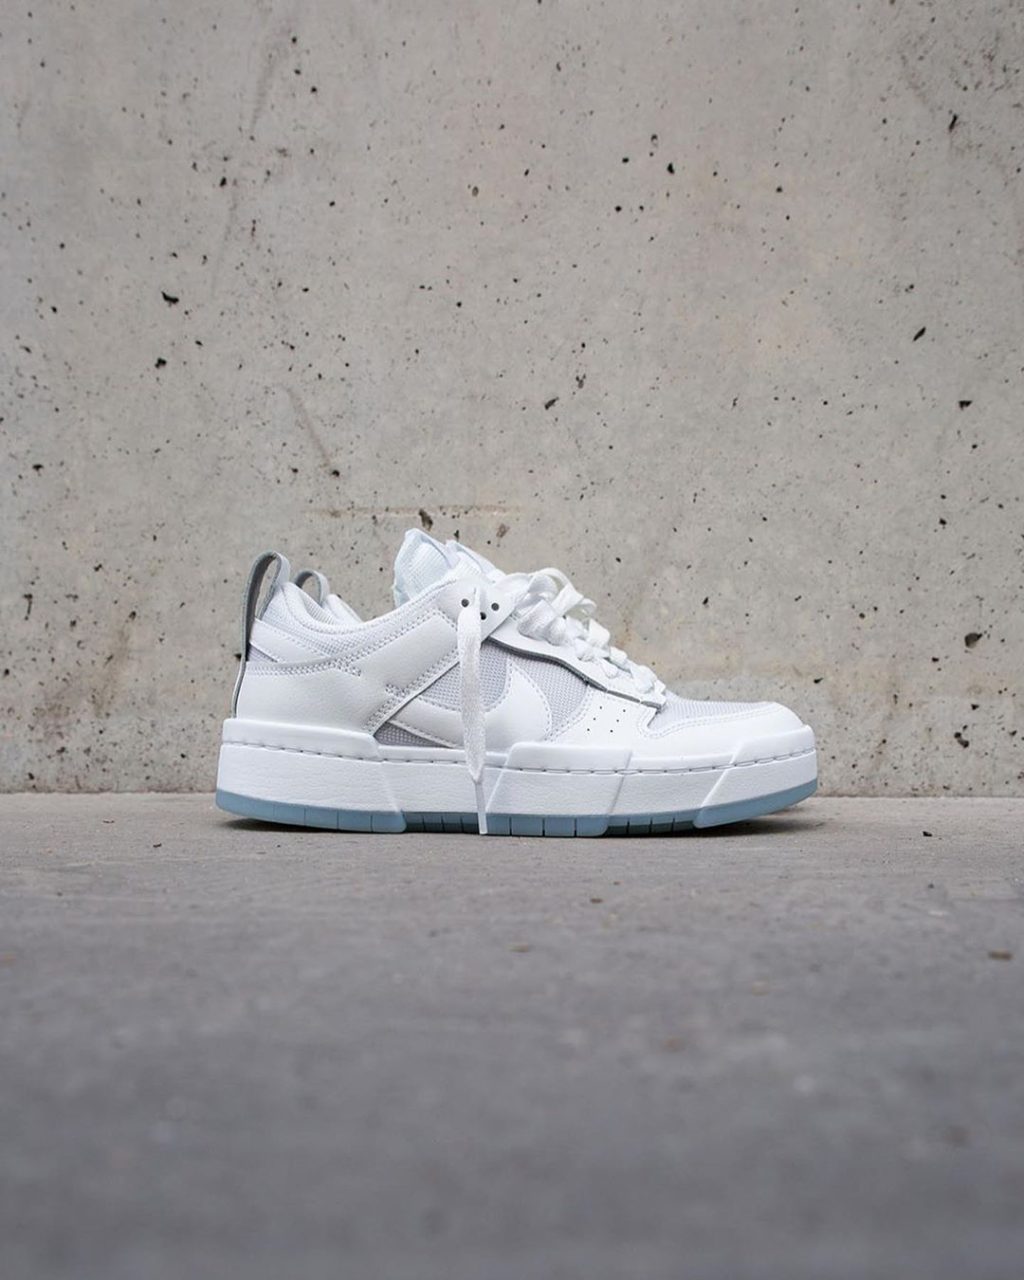 nike-dunk-low-disrupt-ck6654-100-release-20200904